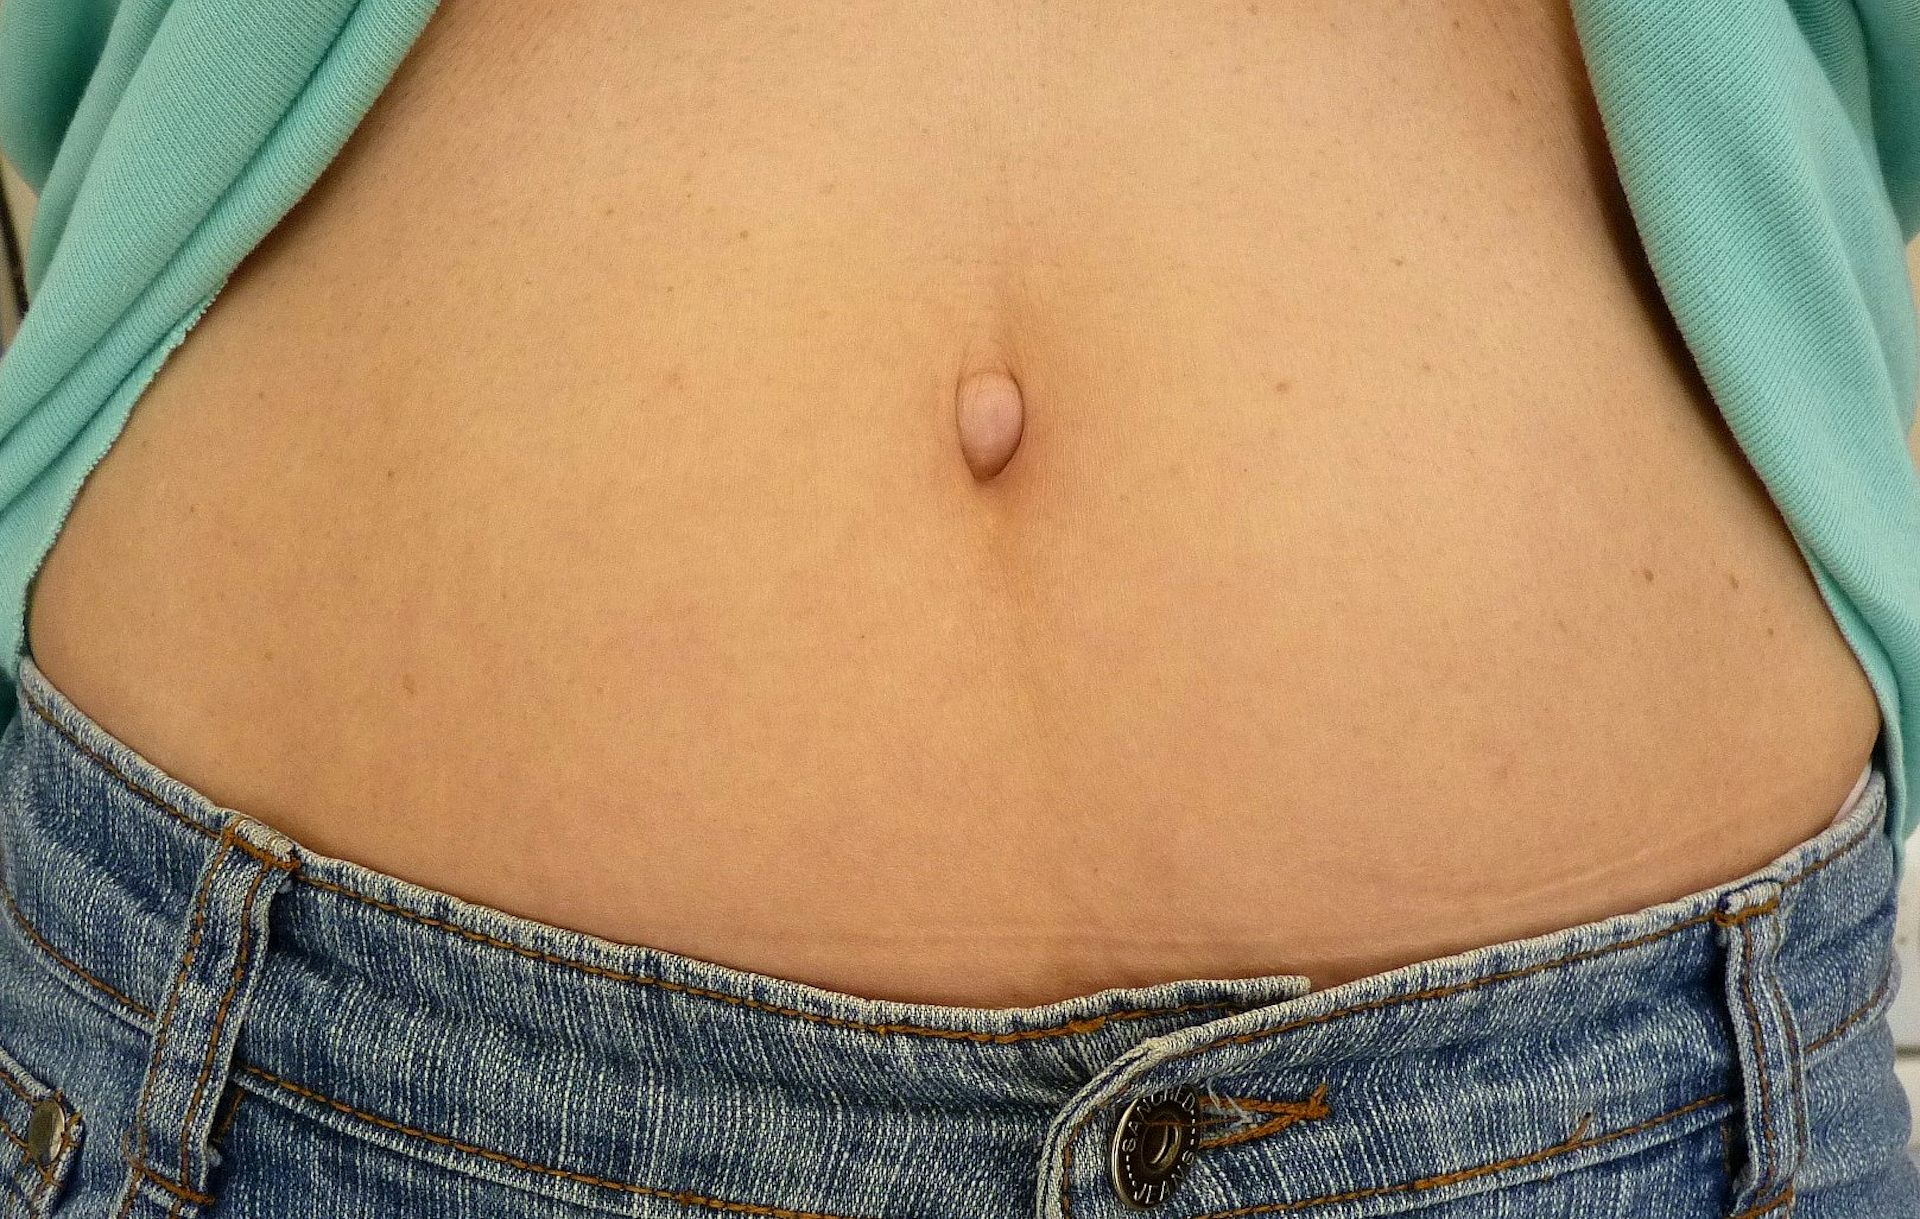 images of outie belly buttons